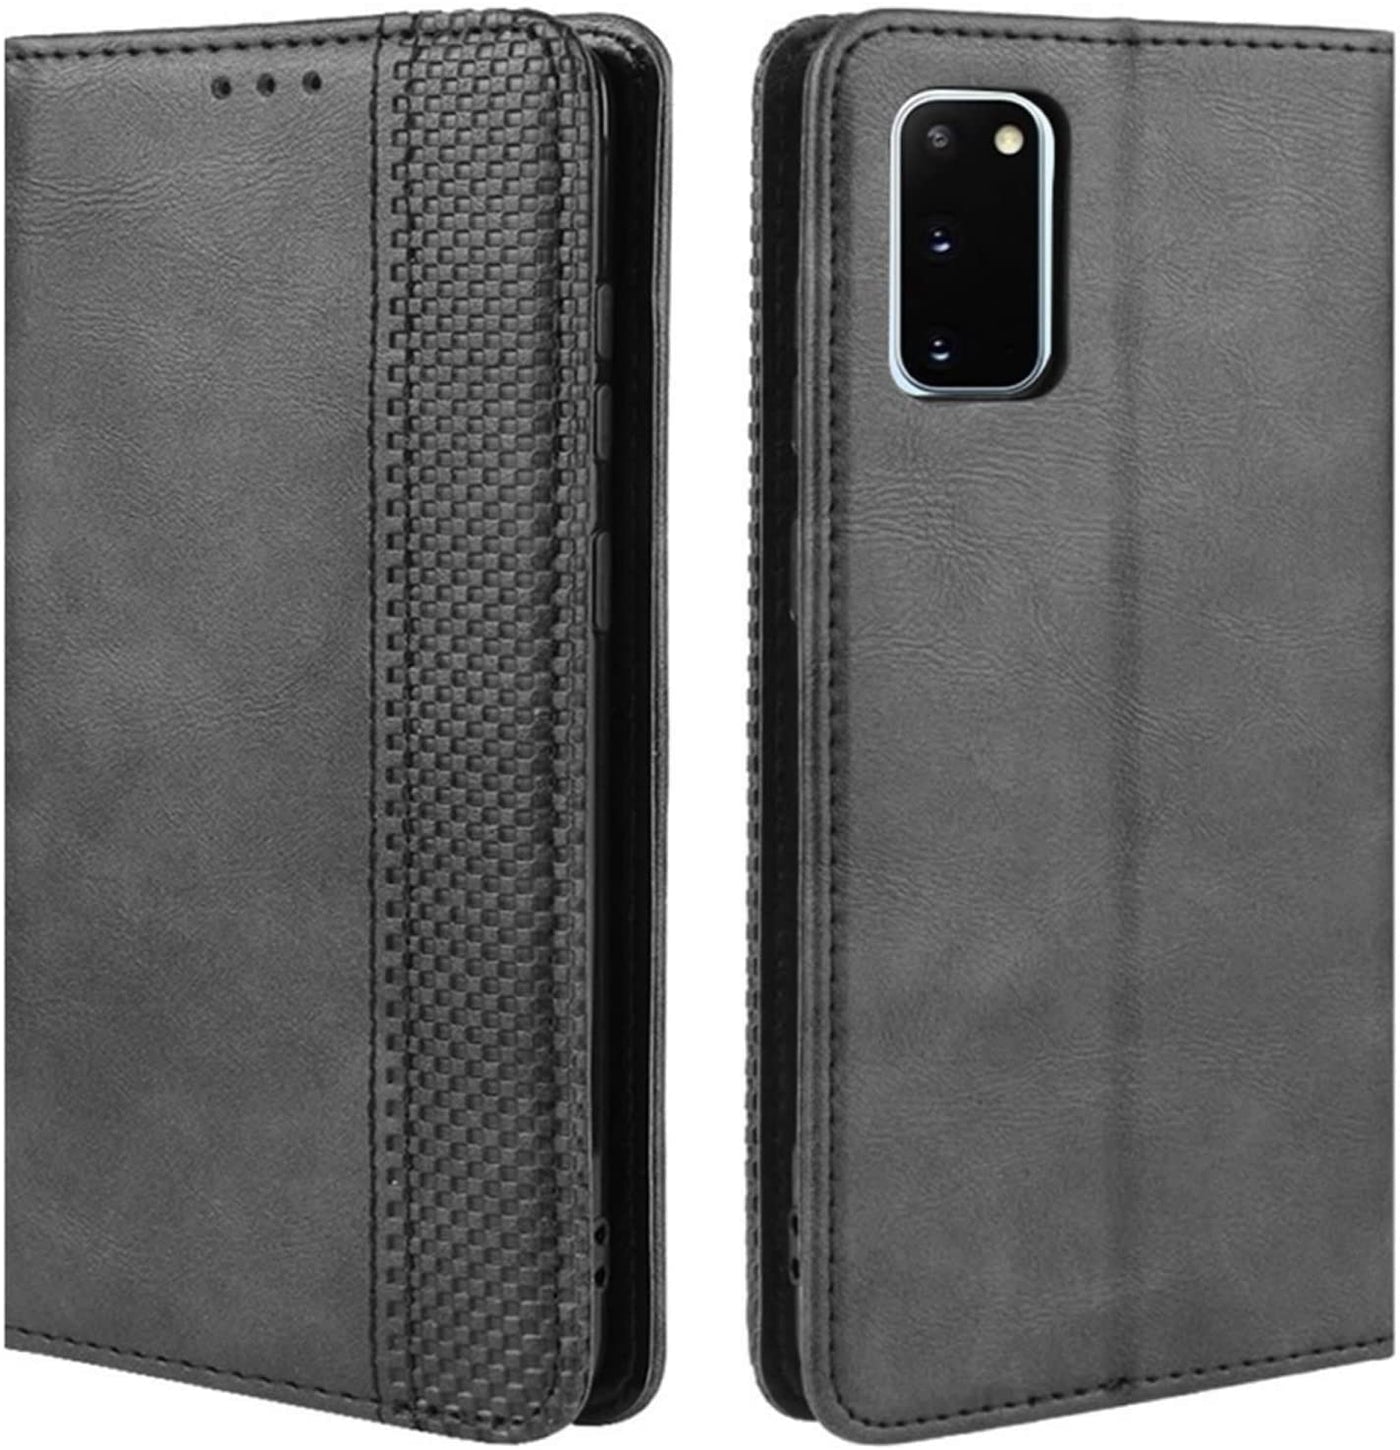 Samsung Galaxy S20 FE black color leather wallet flip cover case By excelsior